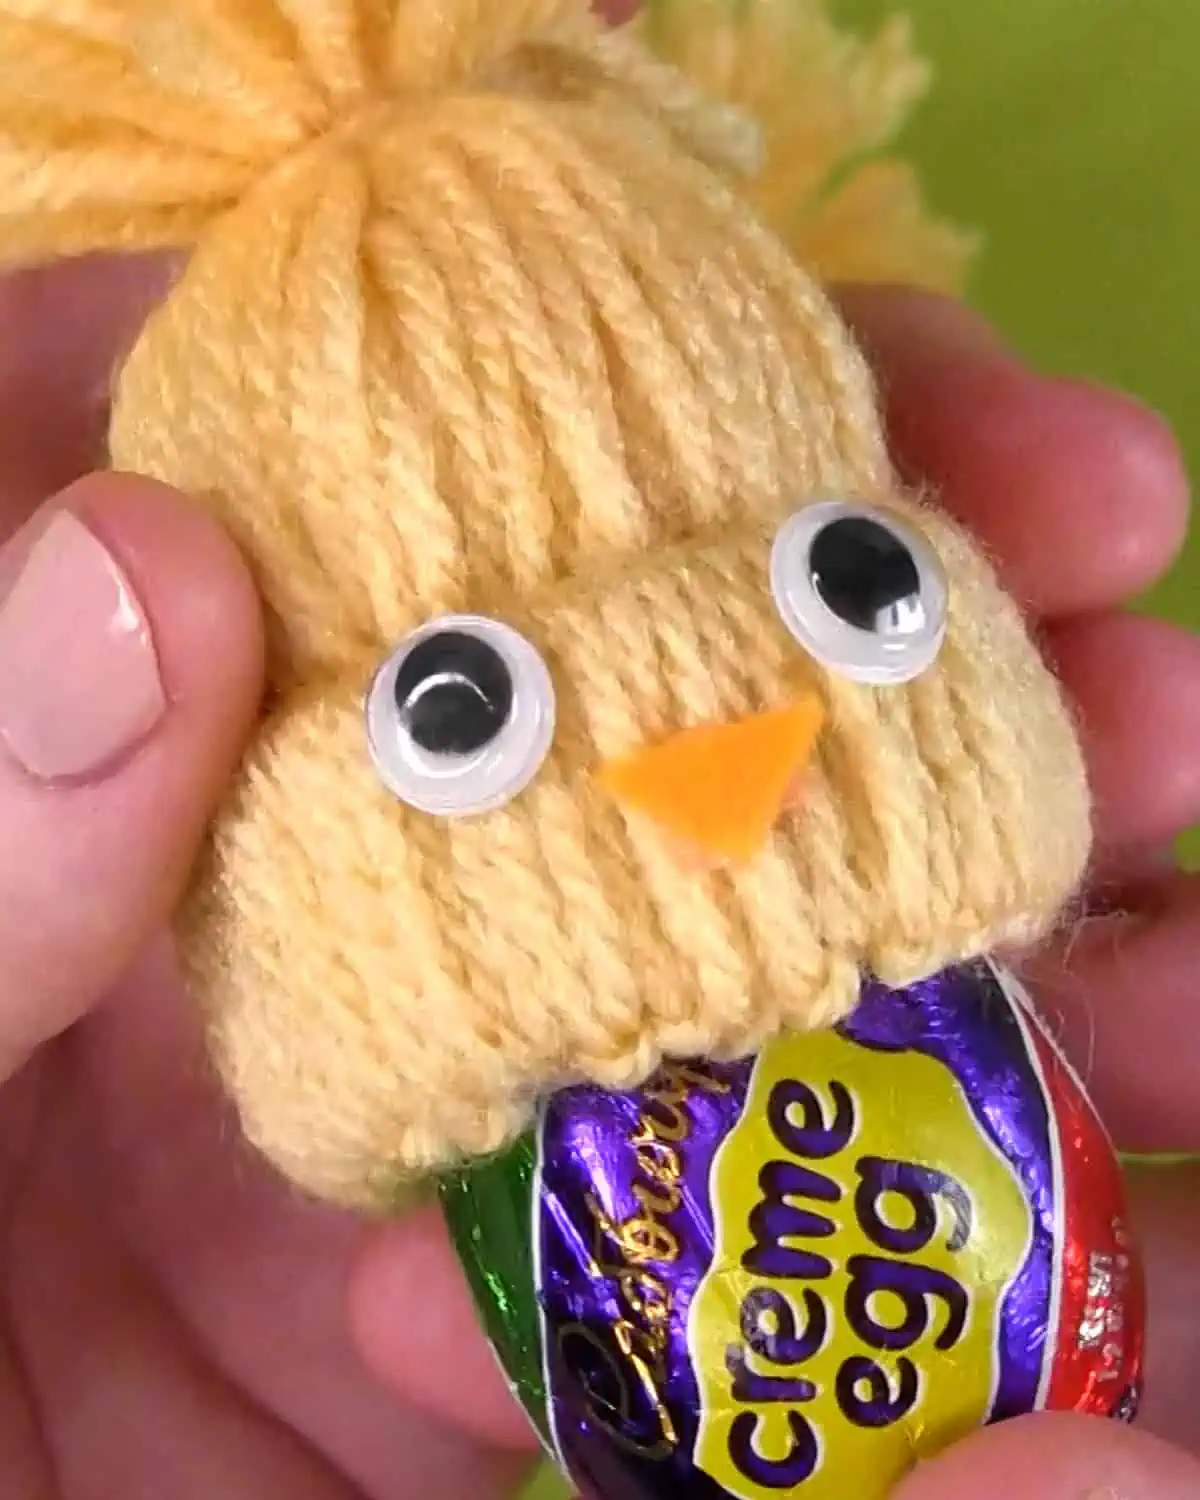 Hands inserting a Cadbury Creme Egg into a Yarn Craft Chick Cover.